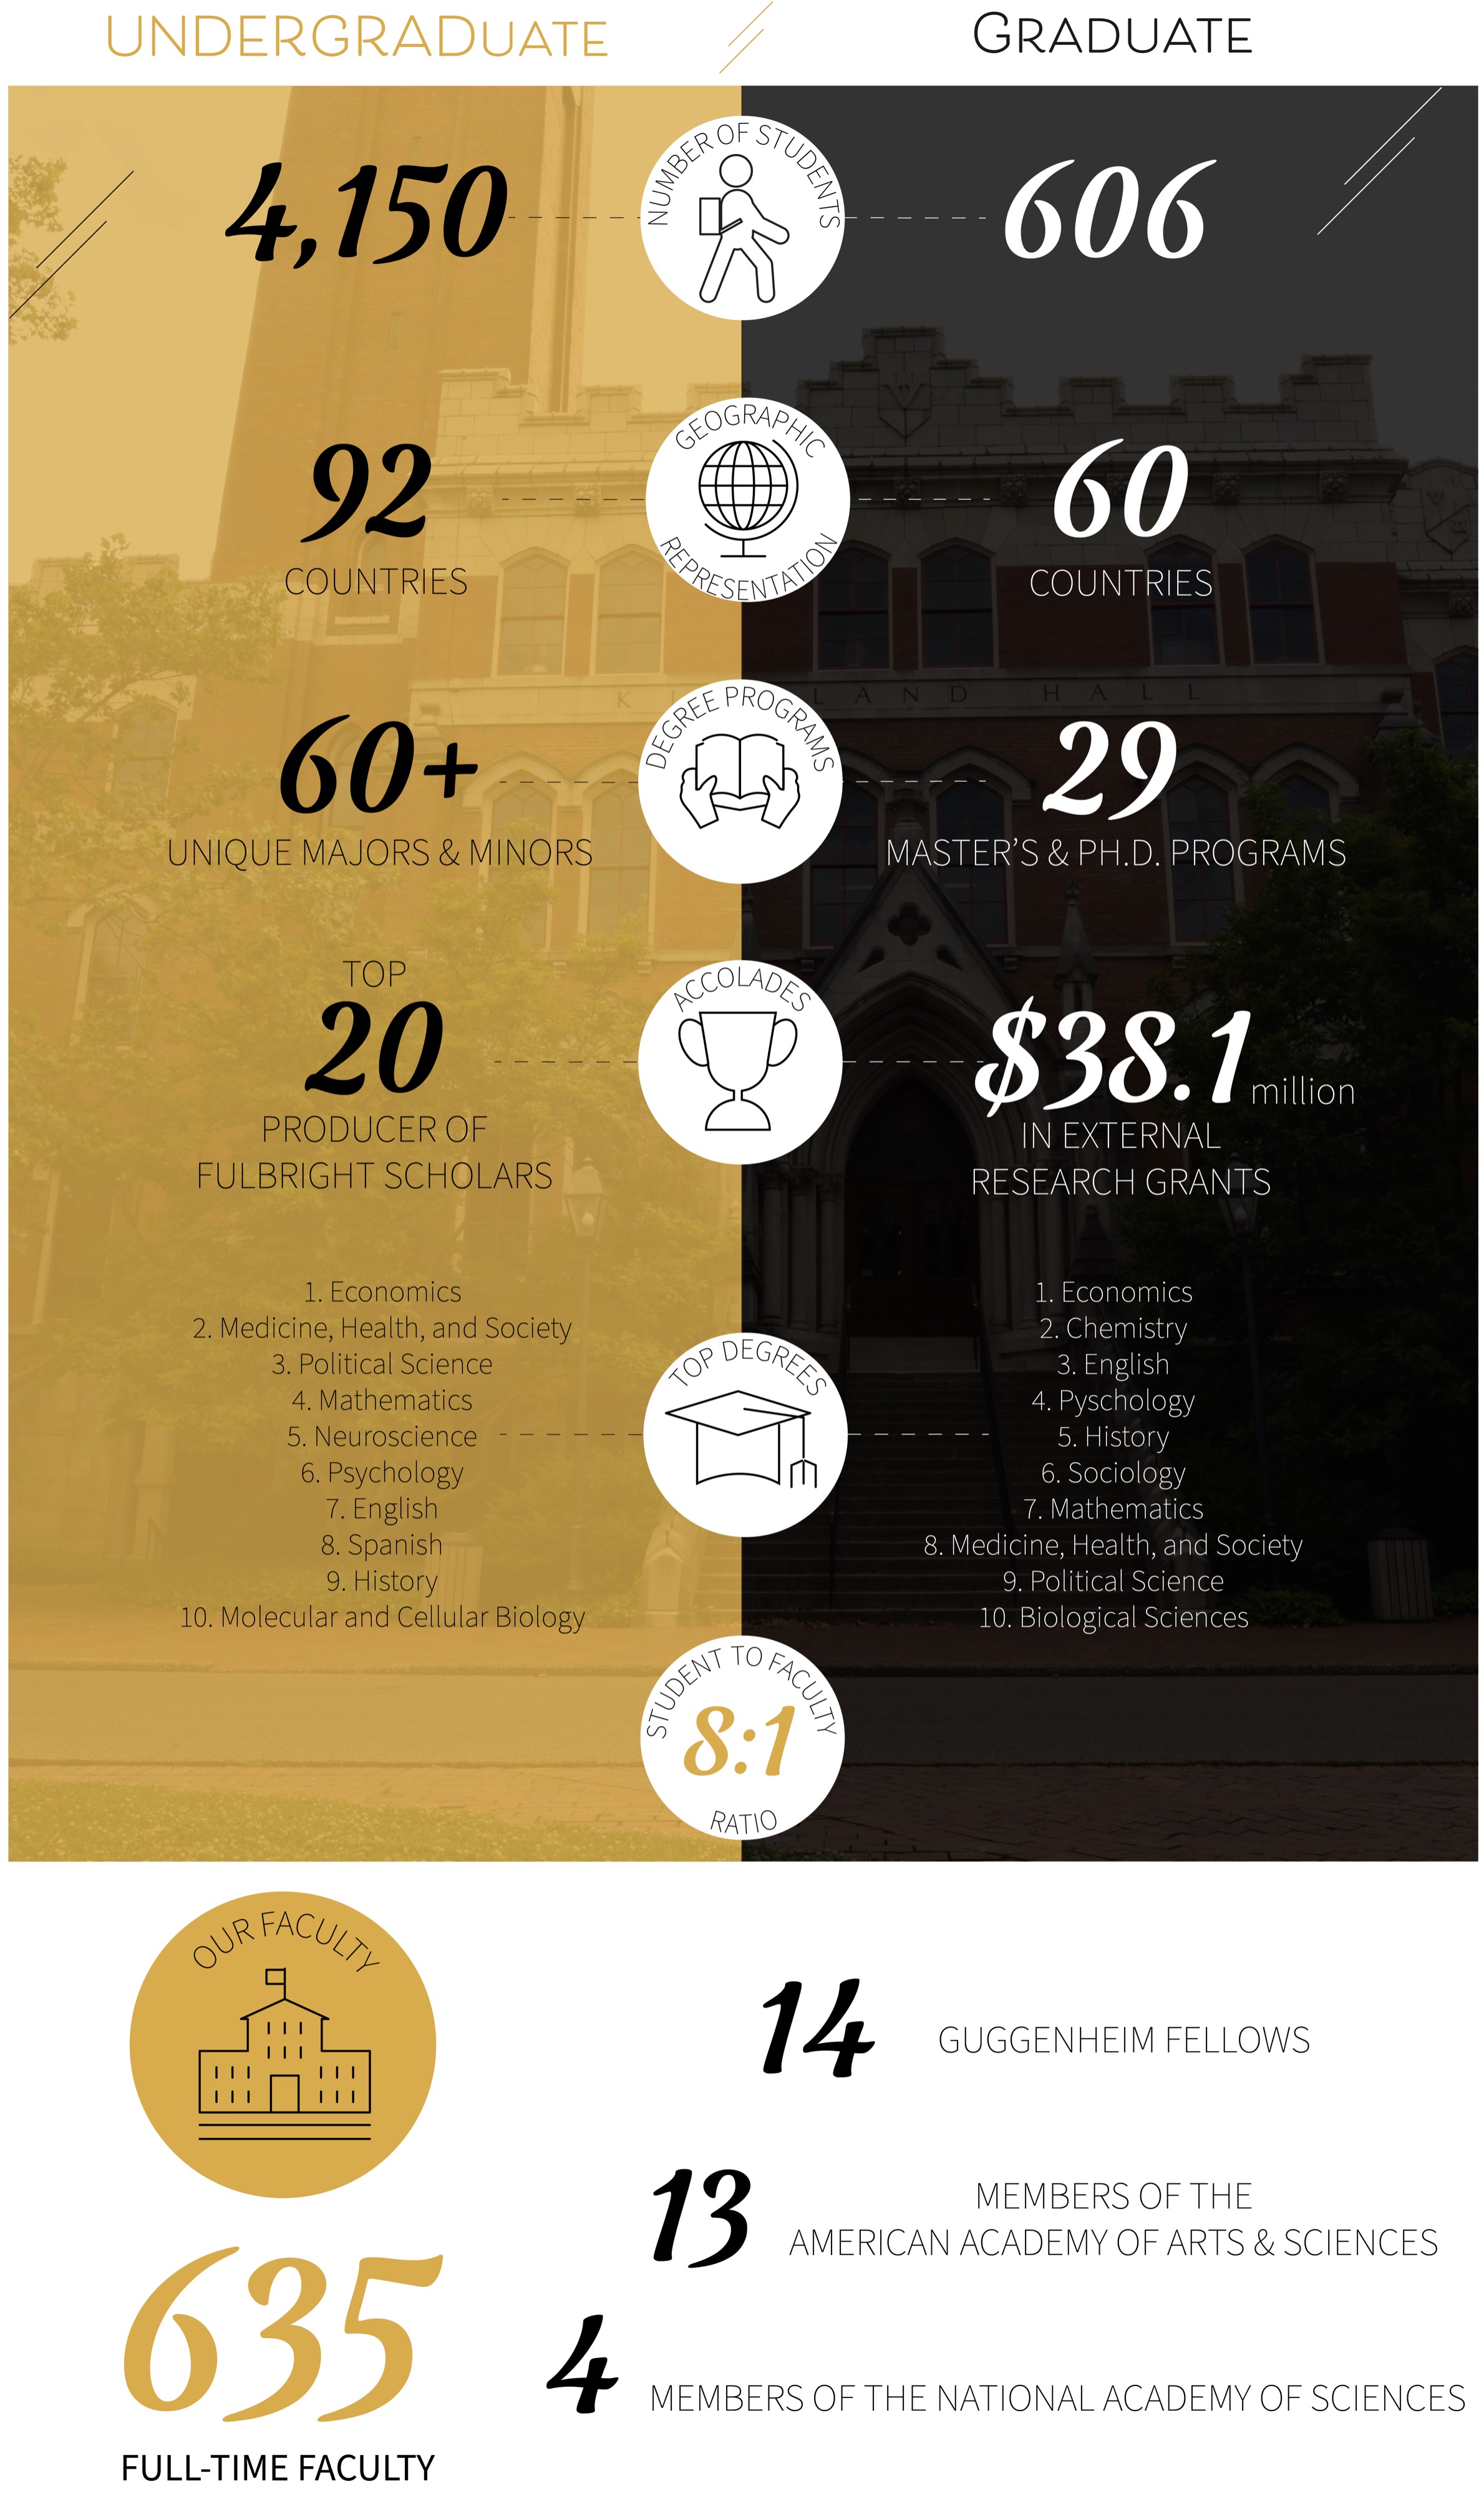 Quick facts about the College of Arts and Science